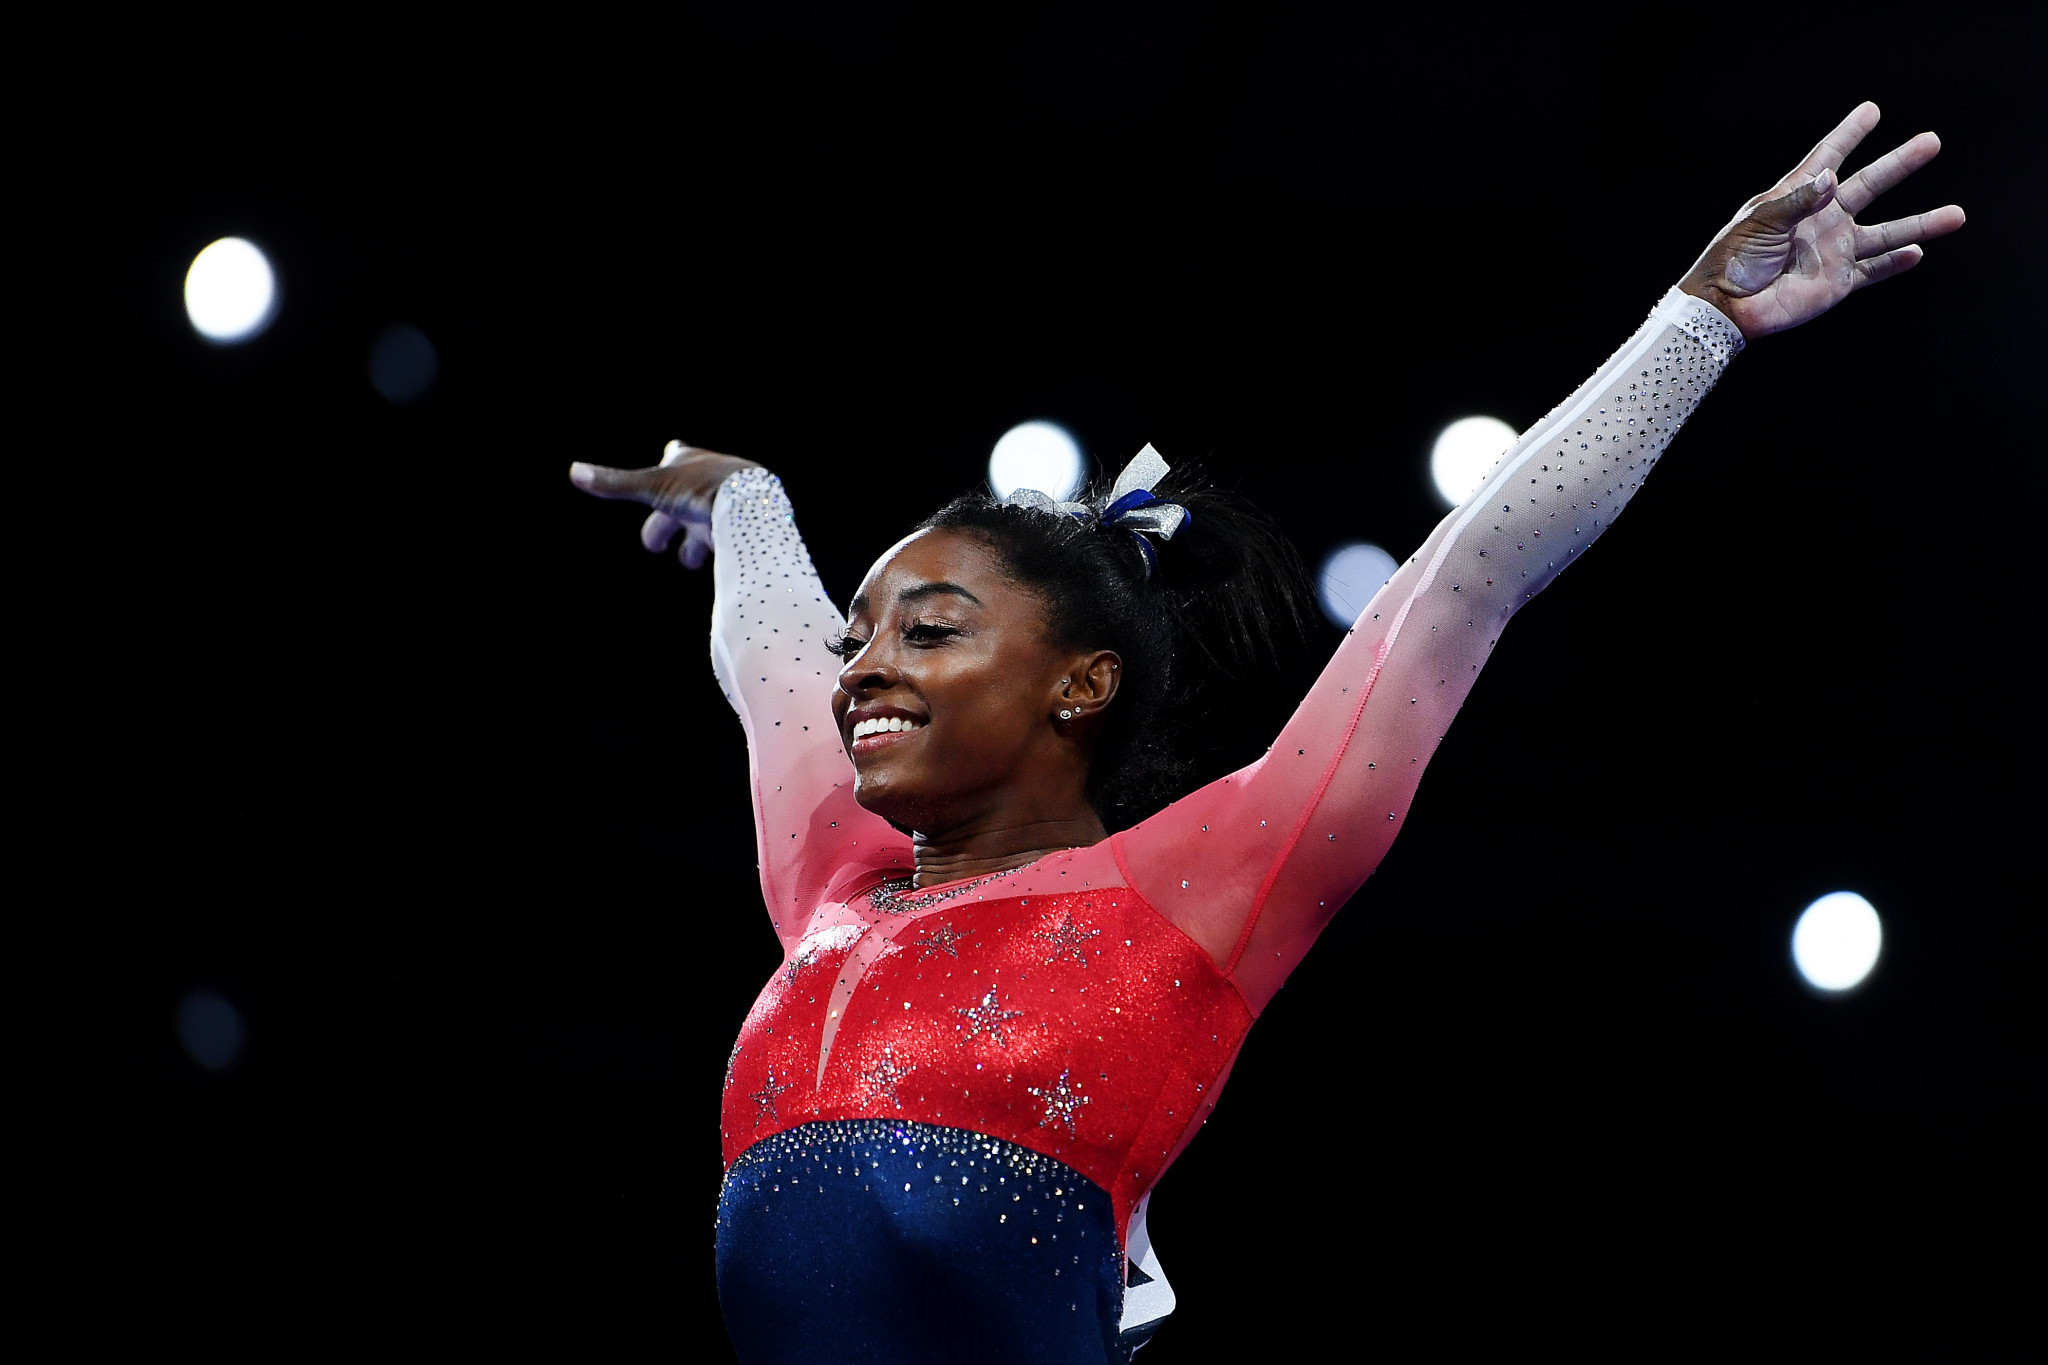 Biles claims record 21st World Championship medal as US triumph